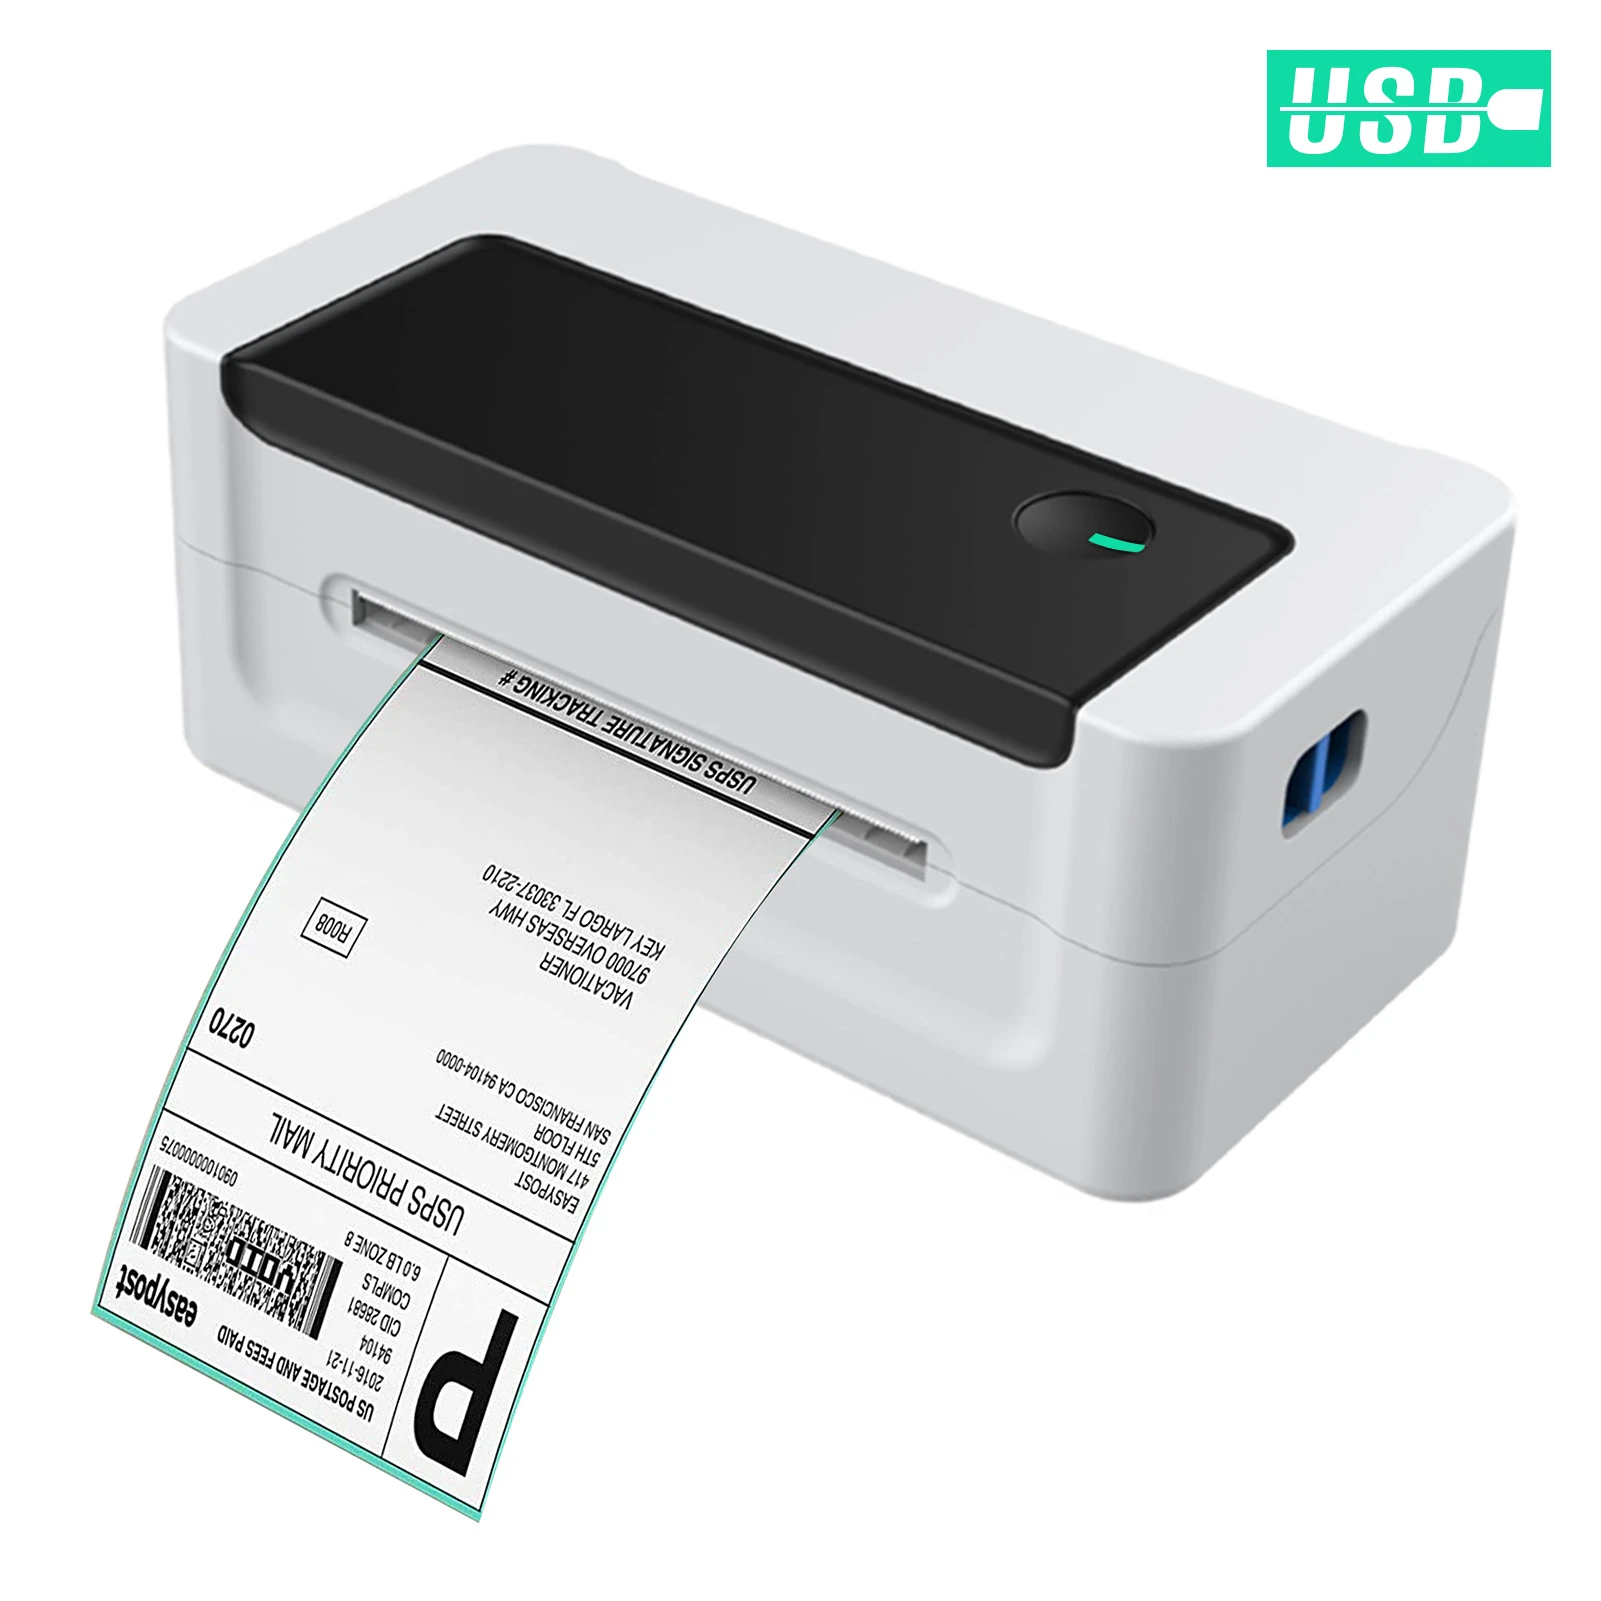 L1081 Protable 150mm/s High Speed Thermal Label Printer Shipping Label 110mm 4*6 Paper Width For Office/Market/Warehouse USB best mini photo printer for iphone